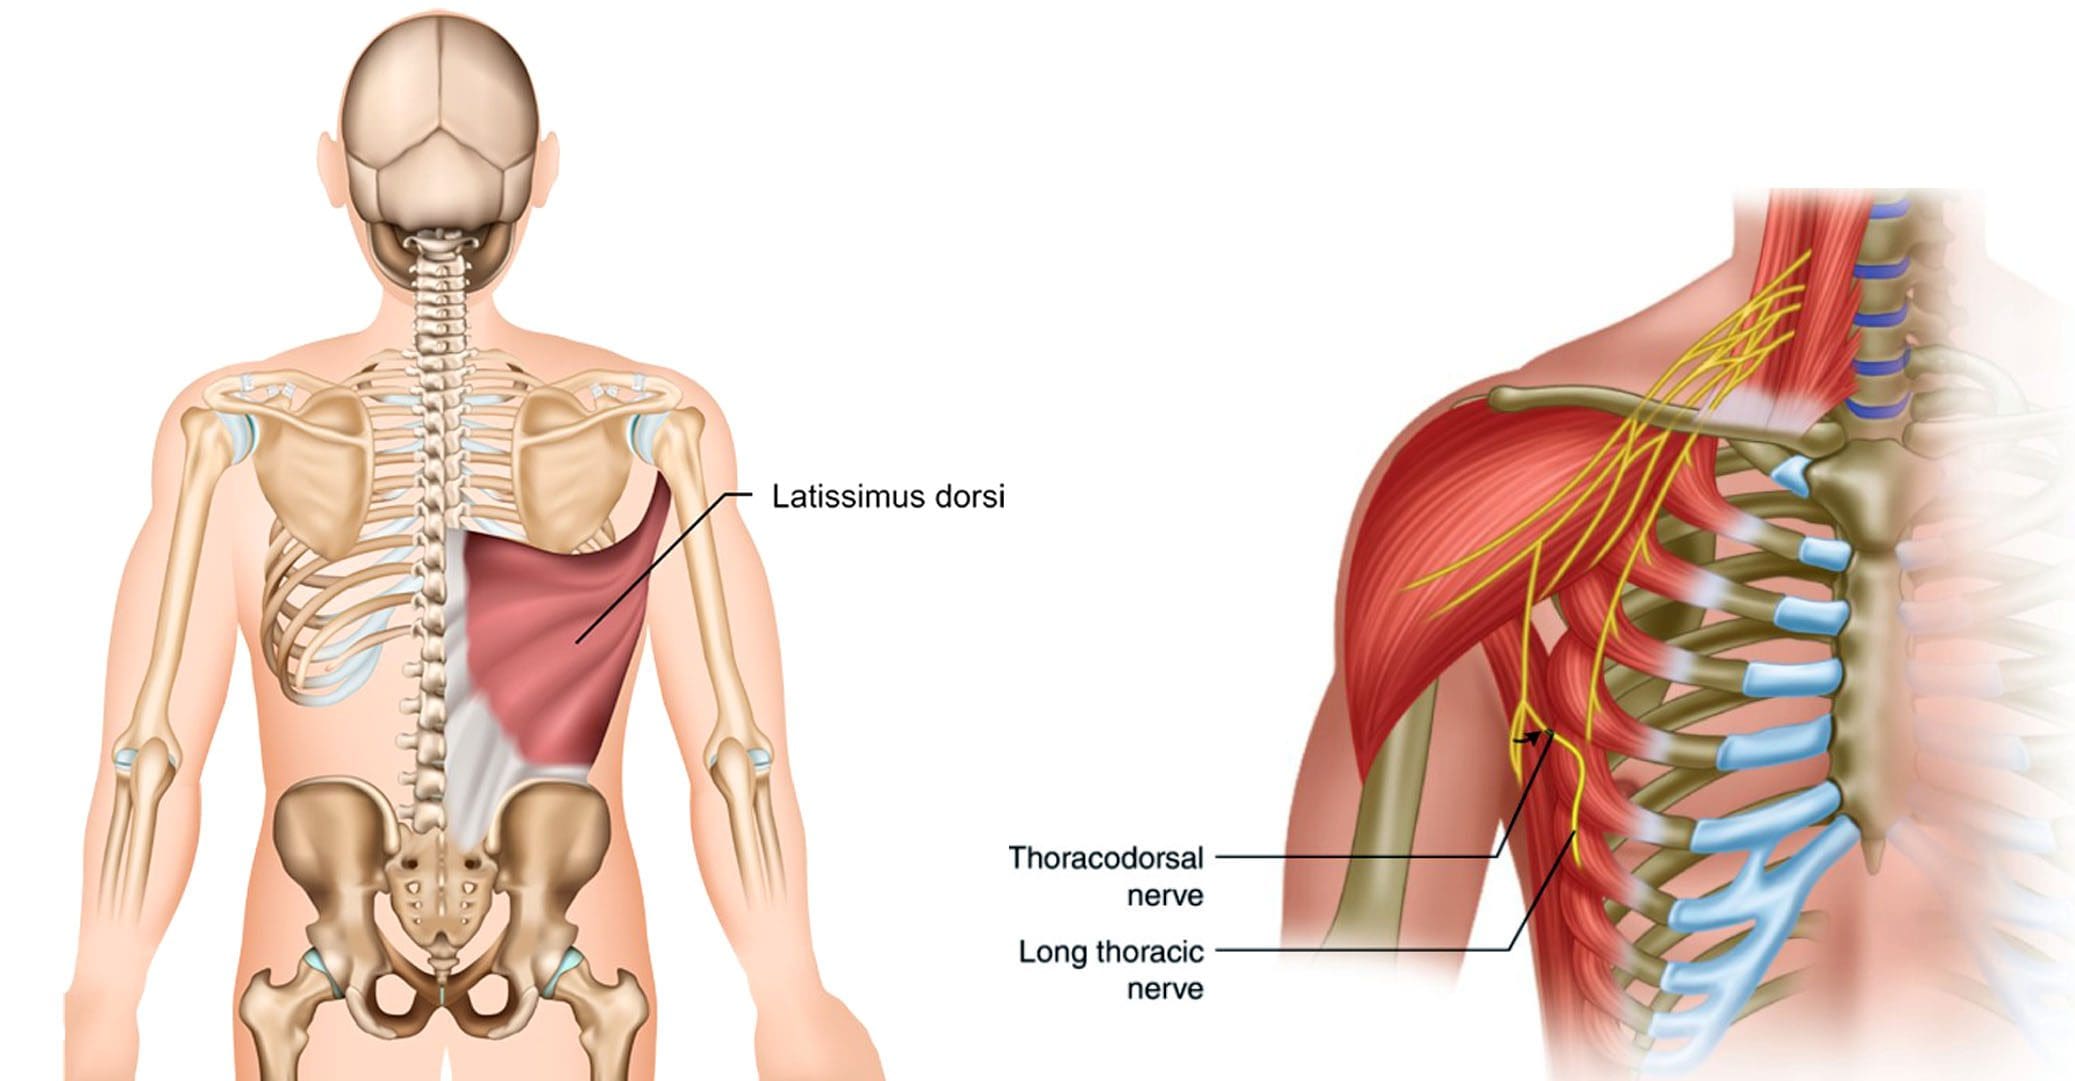 A Comprehensive Look at the Thoracodorsal Nerve